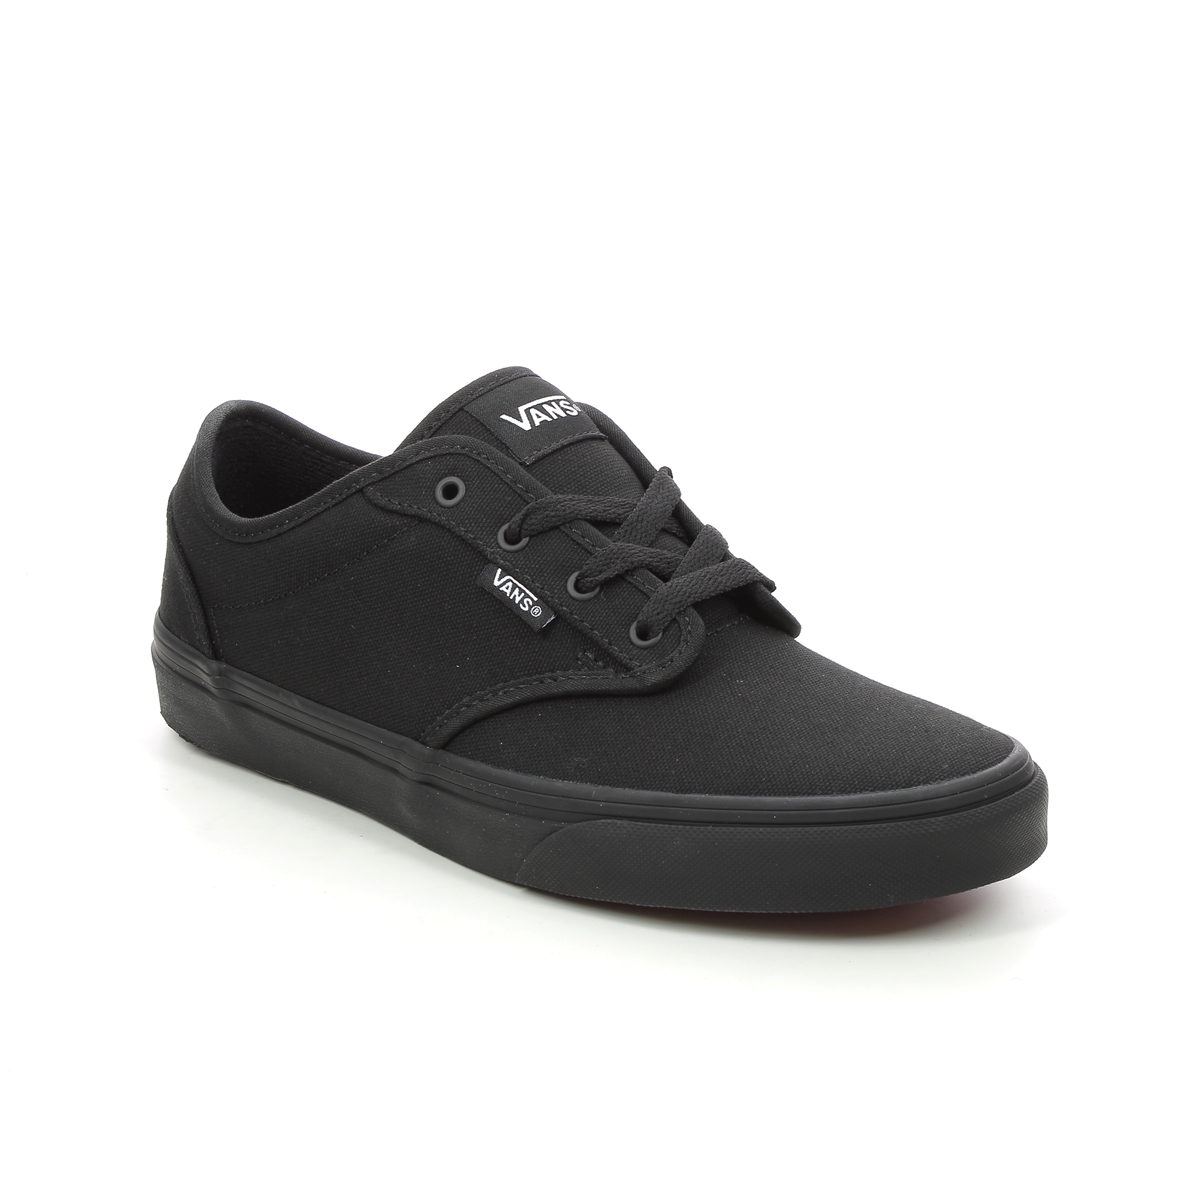 Vans Atwood Youth Black Kids Trainers  Vki5186 In Size 4.5 In Plain Black Vans Boys Trainers For School For kids